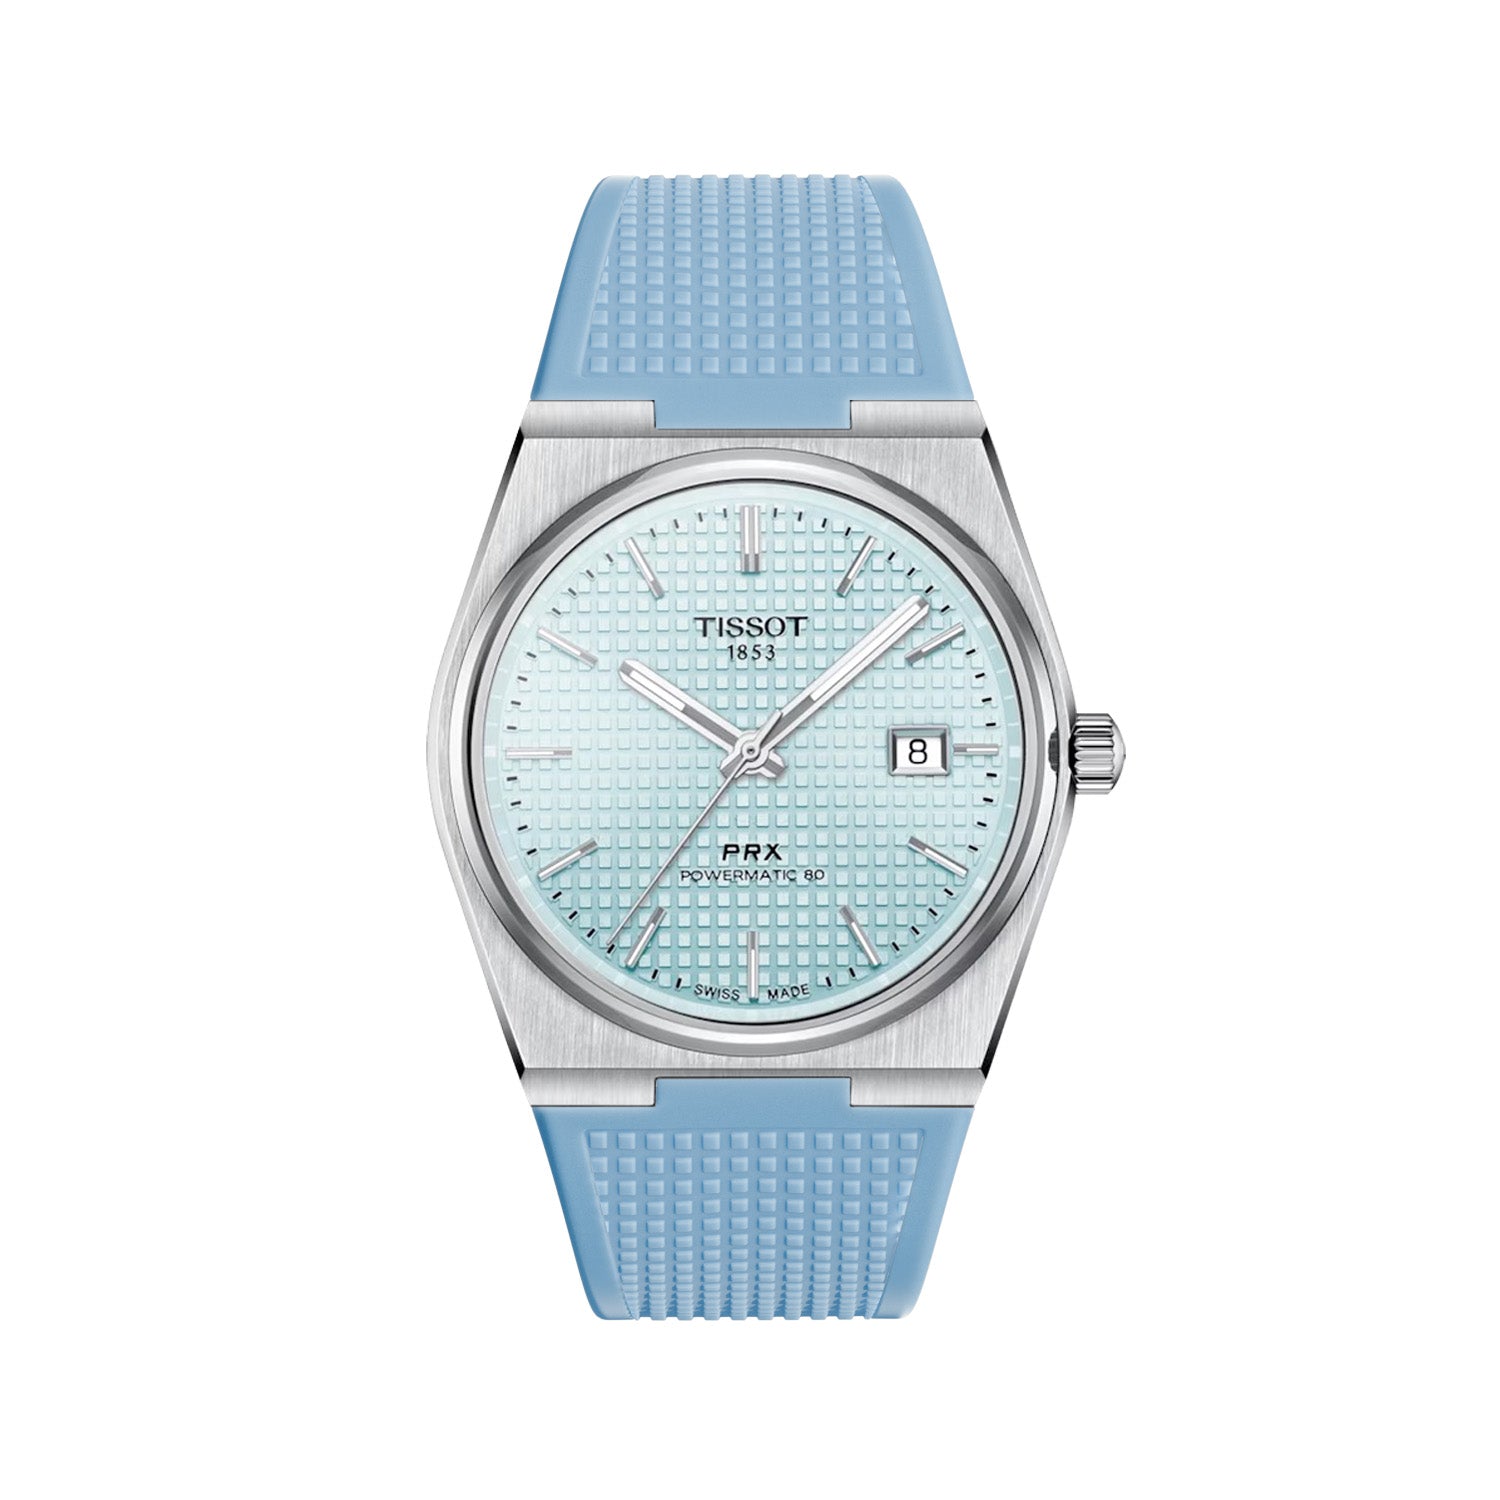 Waffle Premium Silicone Strap - Compatible with Tissot PRX - Quick Release - Pale Blue (2408) -StrapSeeker